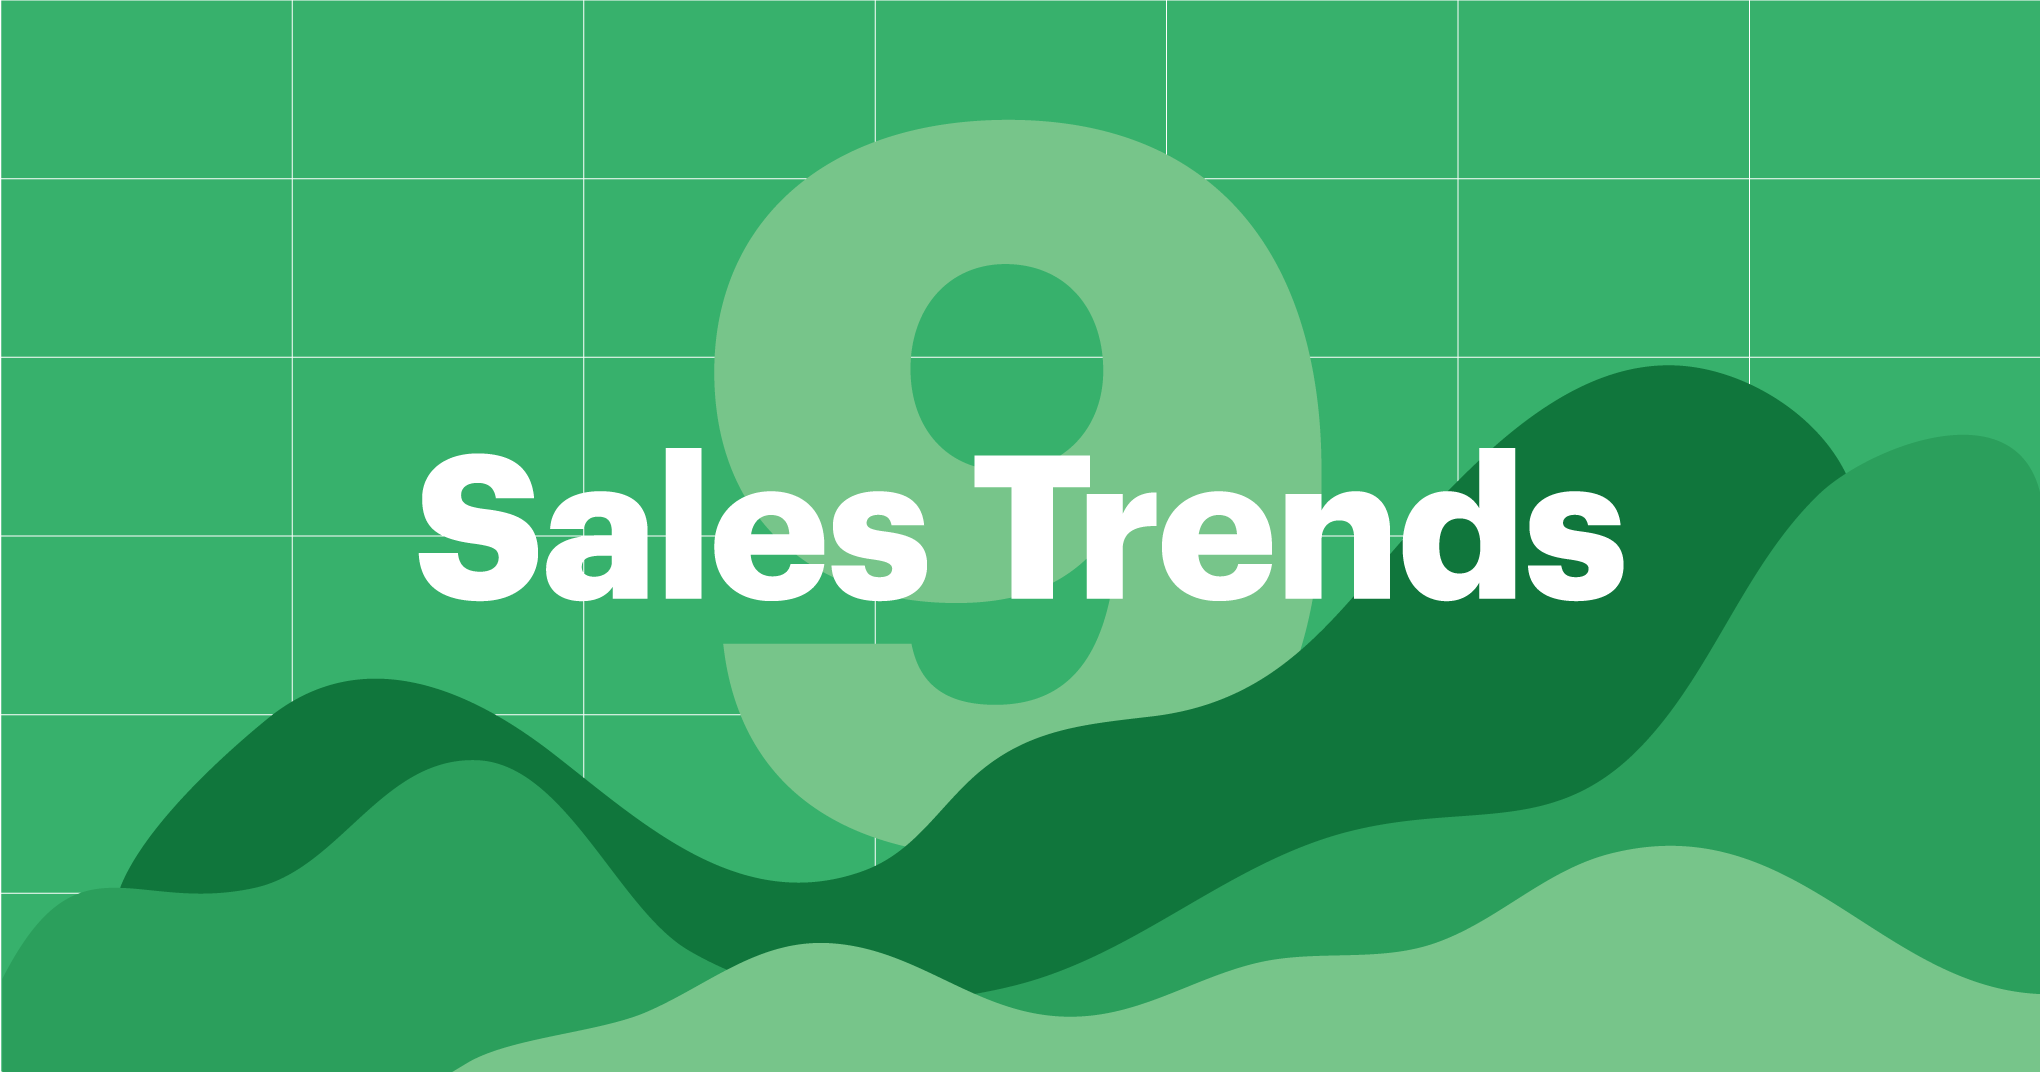 9 sales trends to look out